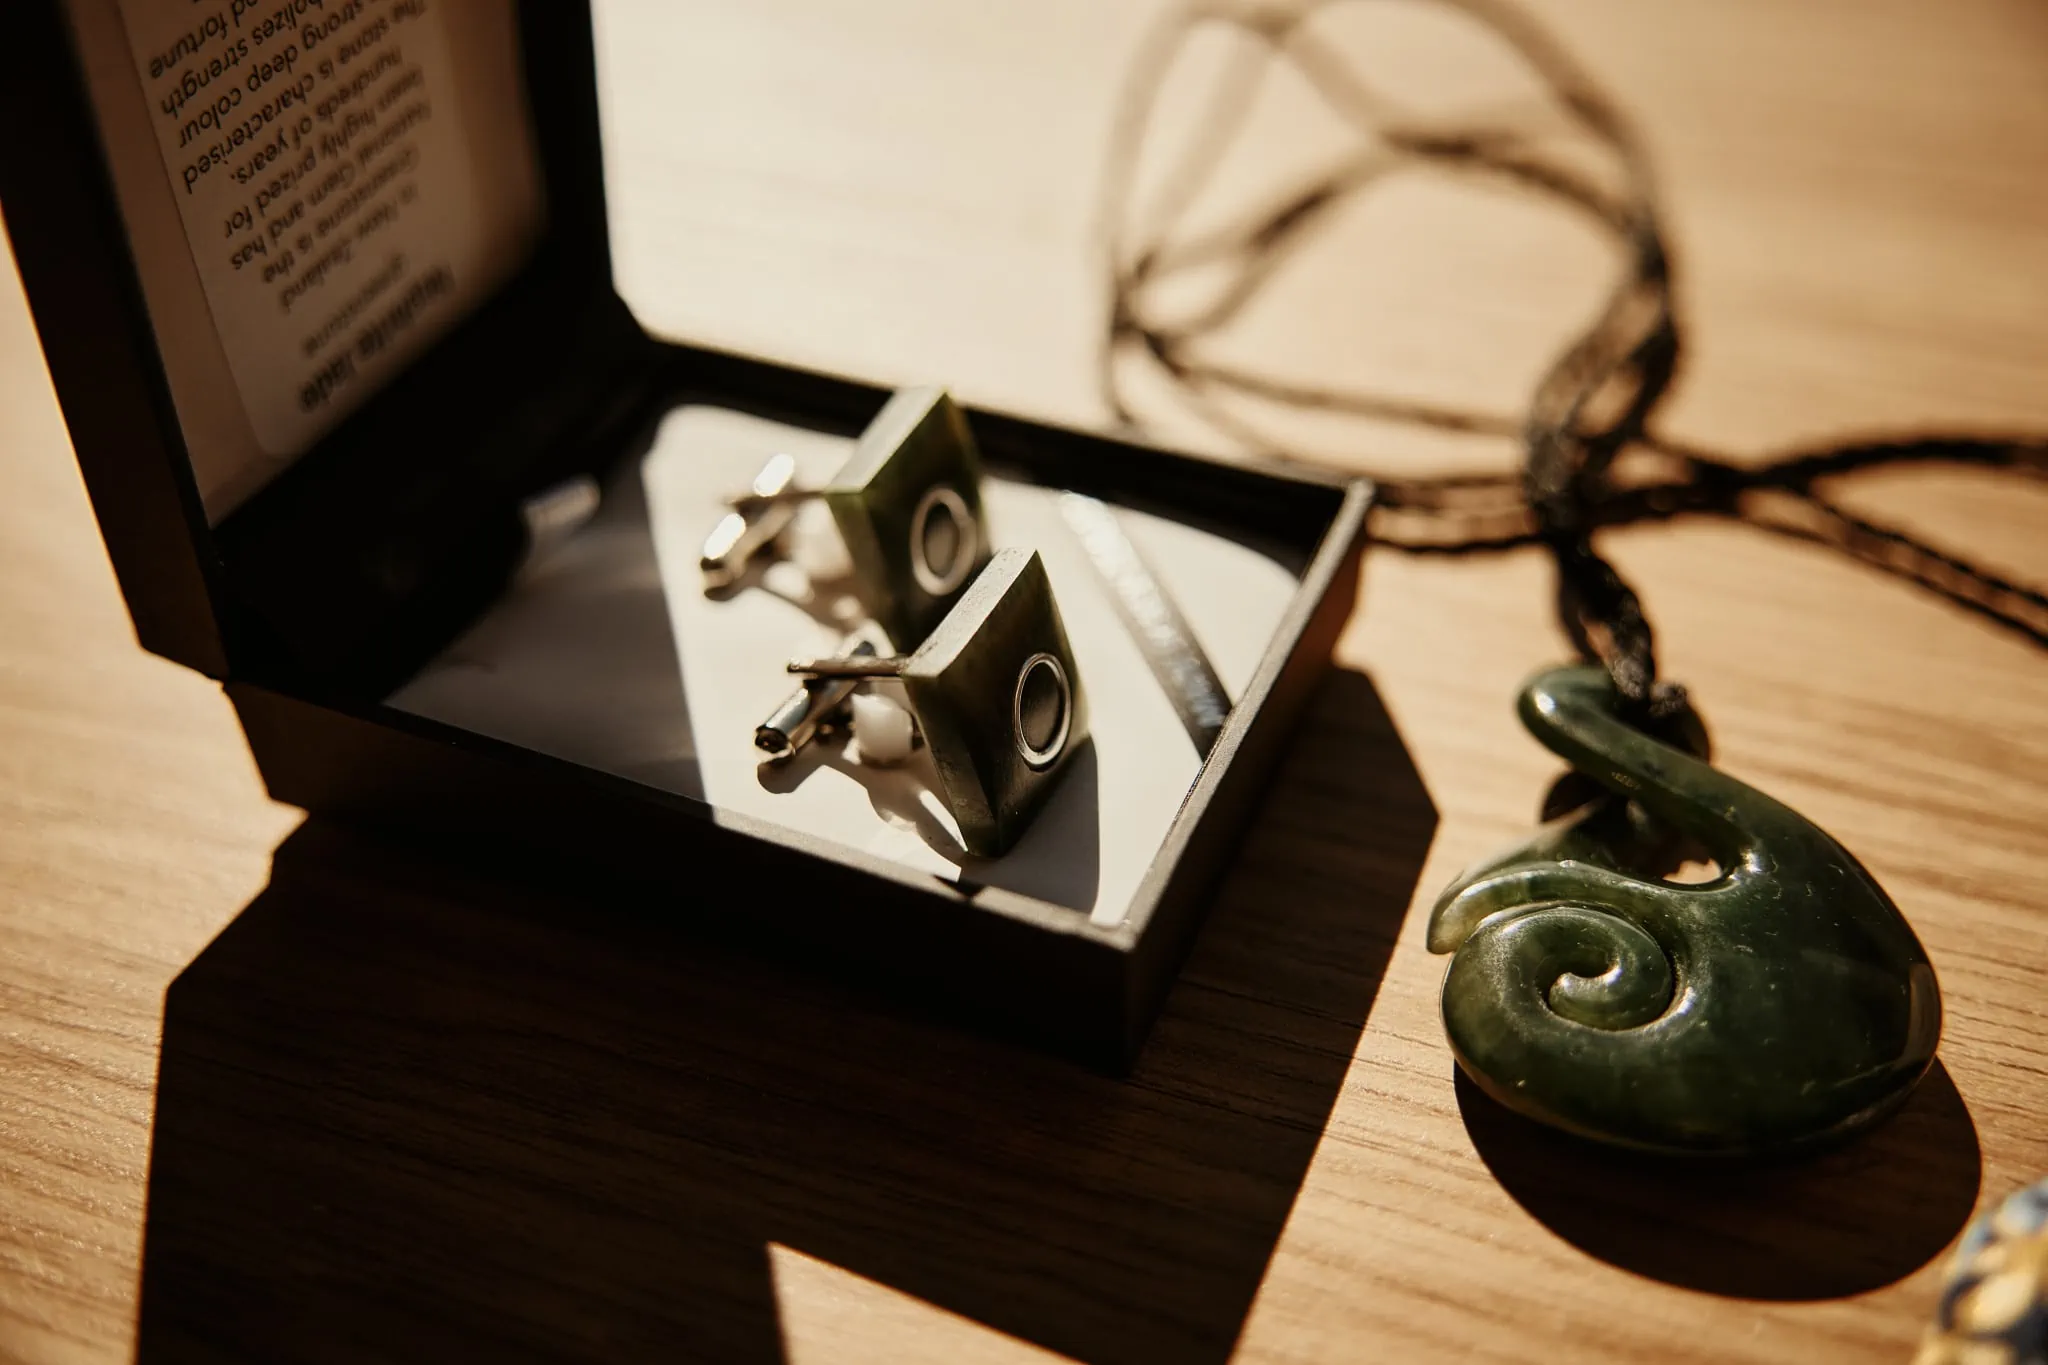 Claire and Rob's Heli Elopement Wedding at Cecil Peak included a stunning pair of earrings and a necklace in a box.